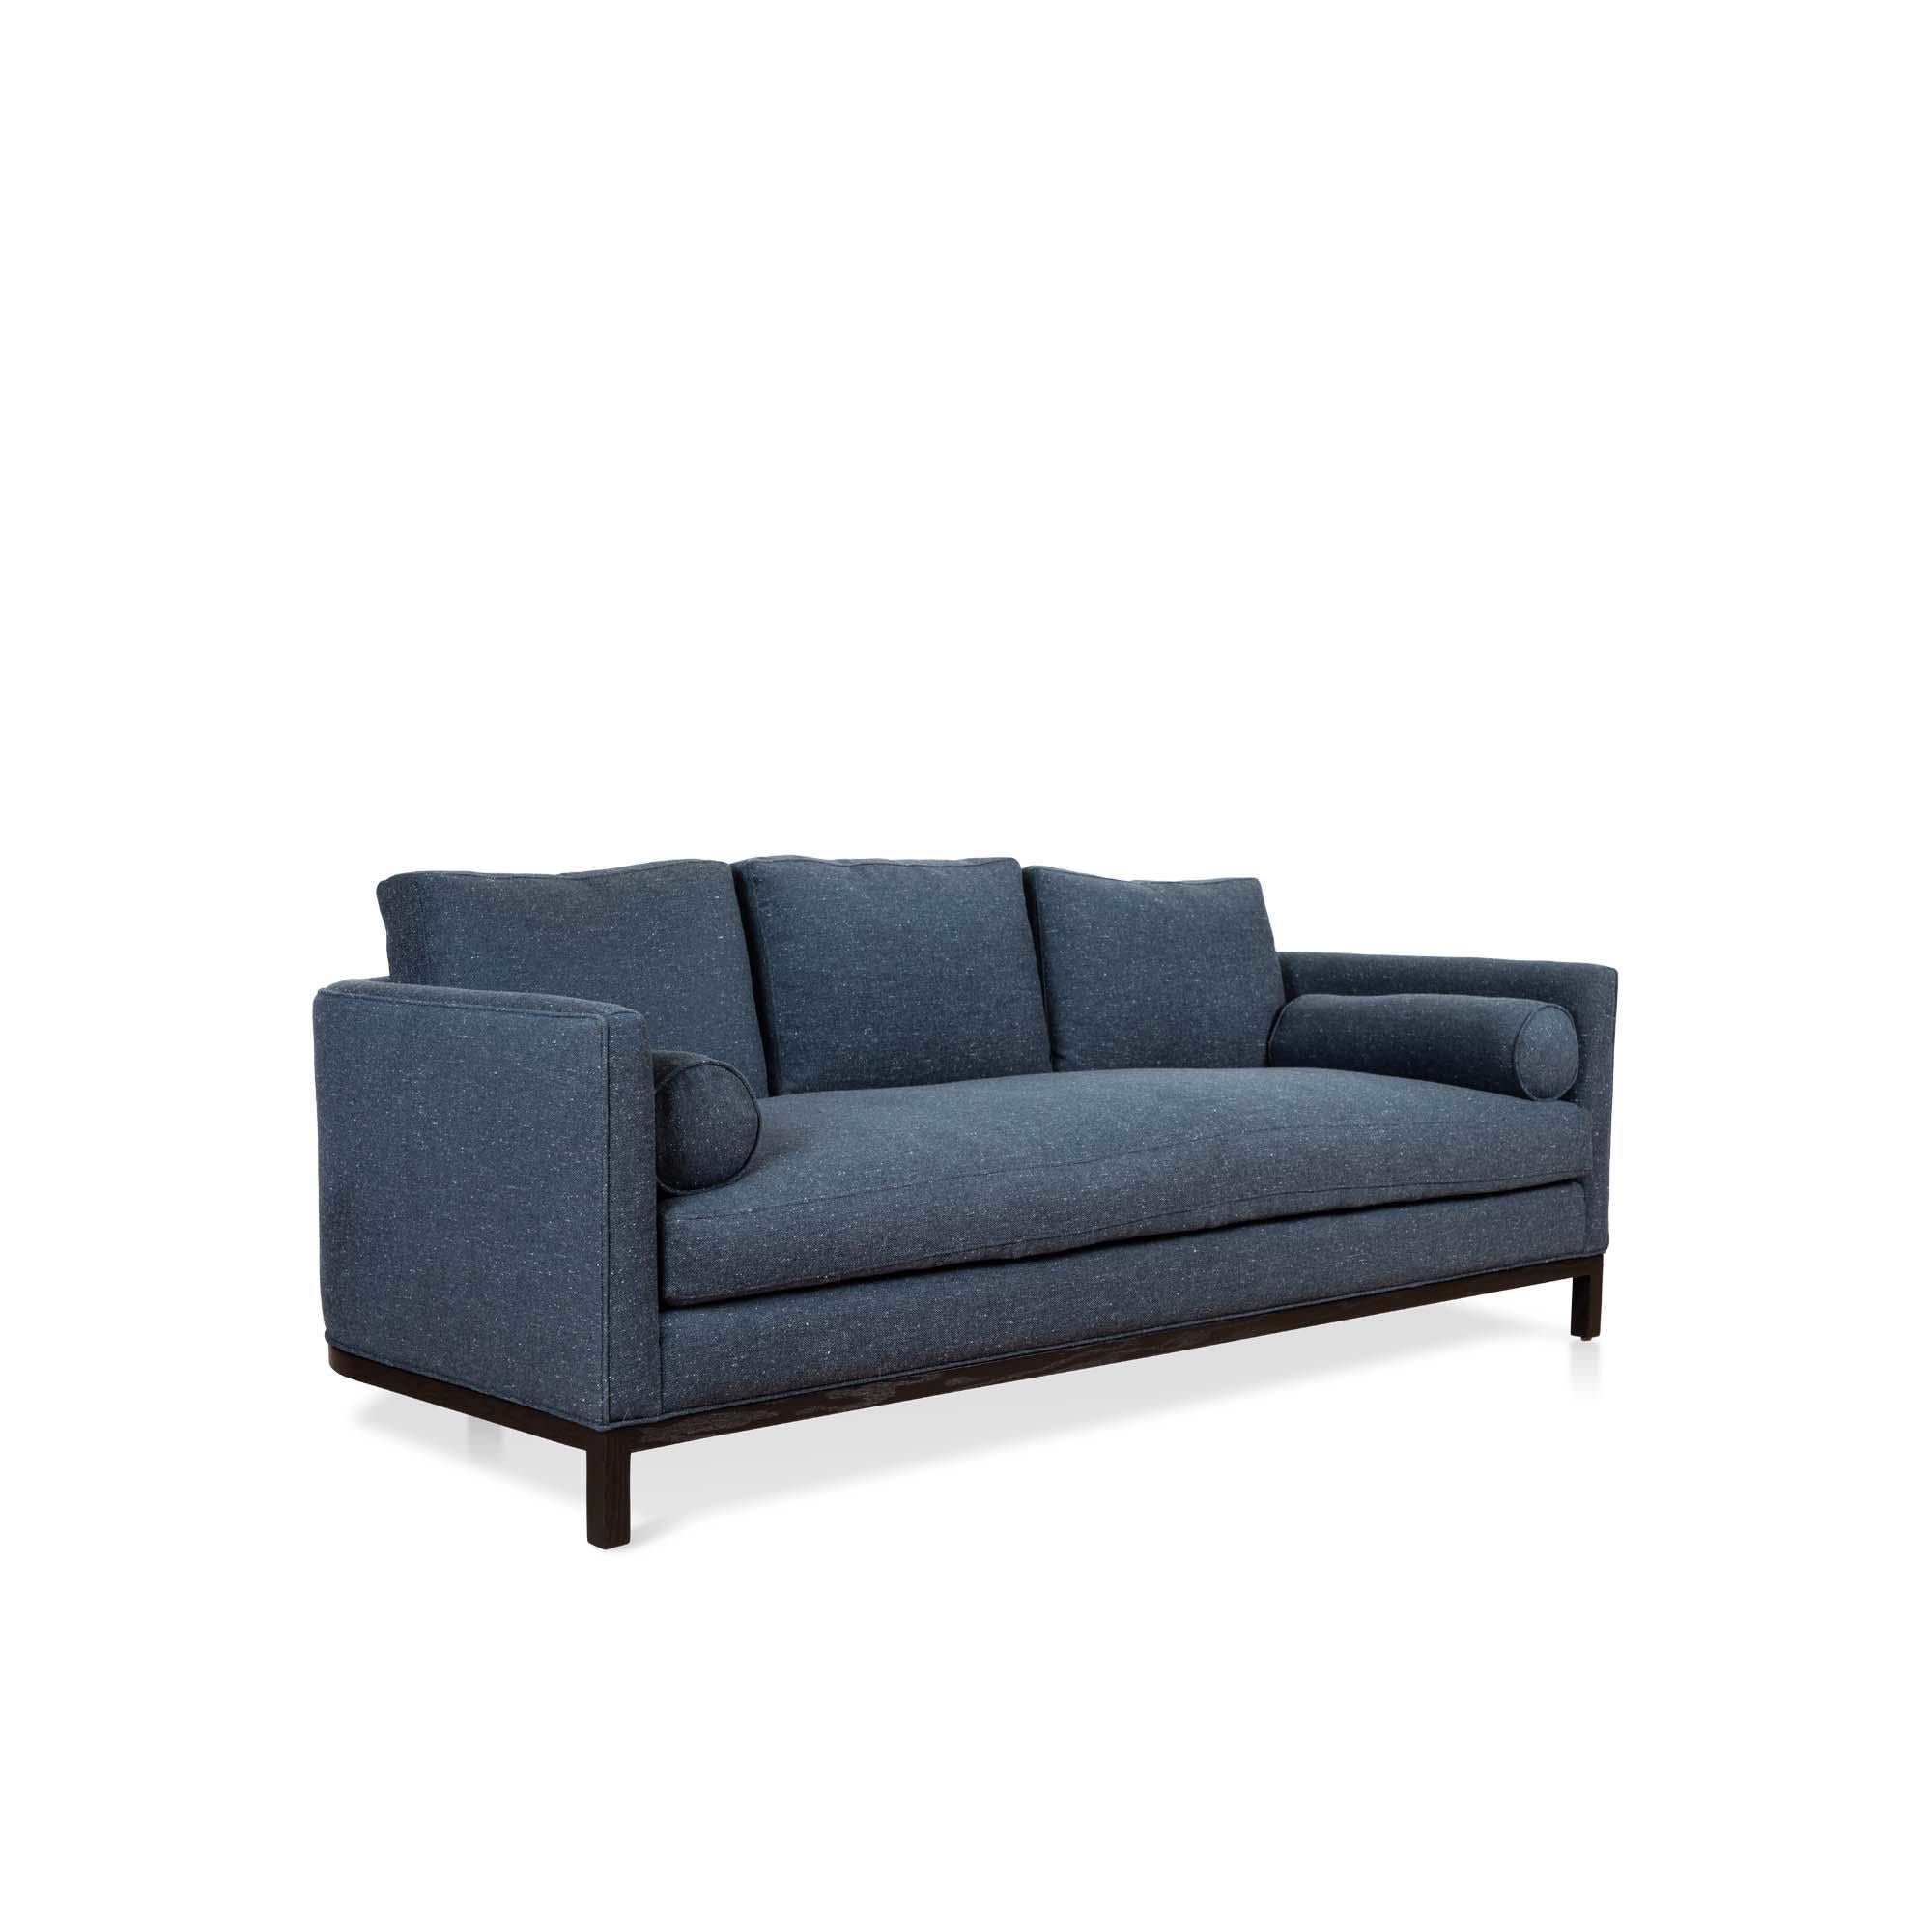 The curved back sofa is a tuxedo style sofa with curved corners and features a single down-wrapped, seat cushion with 3 down-wrapped, removable back cushions and two bolsters. The base can be made in American walnut, white oak or metal. 

The